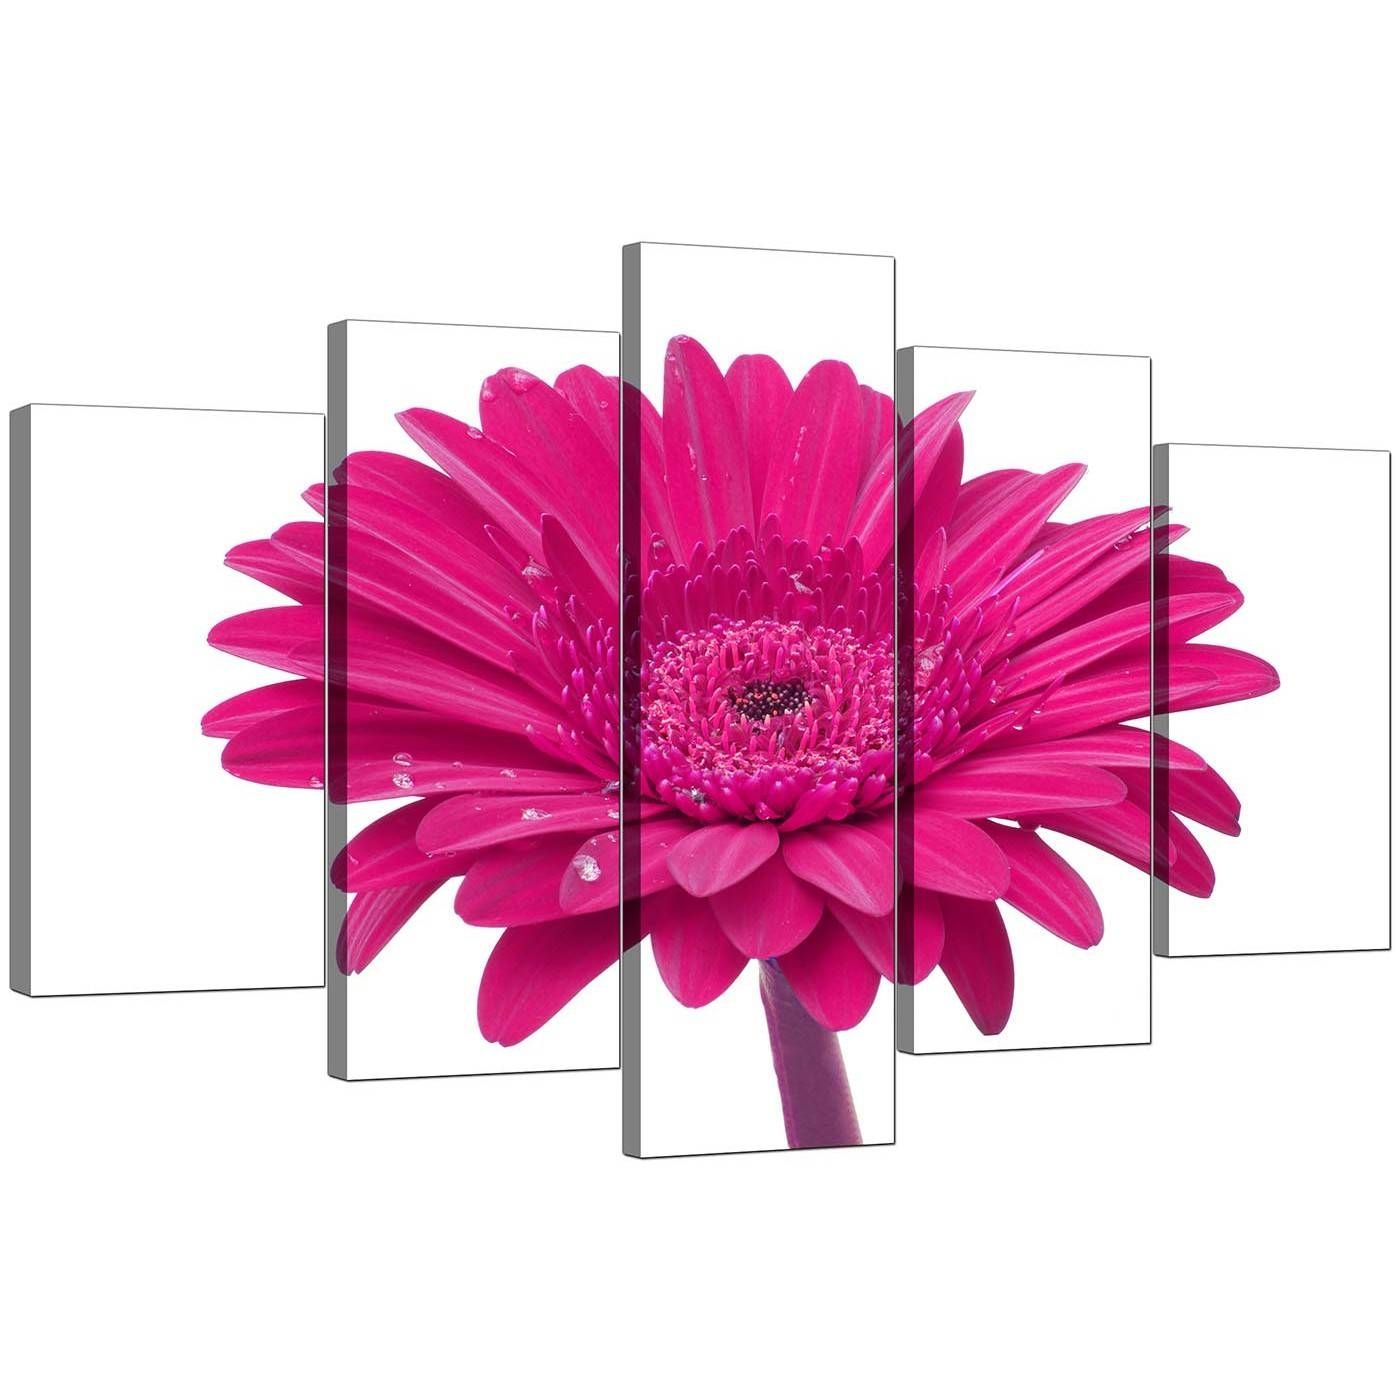 Extra Large Flower Canvas Wall Art 5 Piece In Pink Throughout 2017 Pink Flower Wall Art (View 2 of 20)